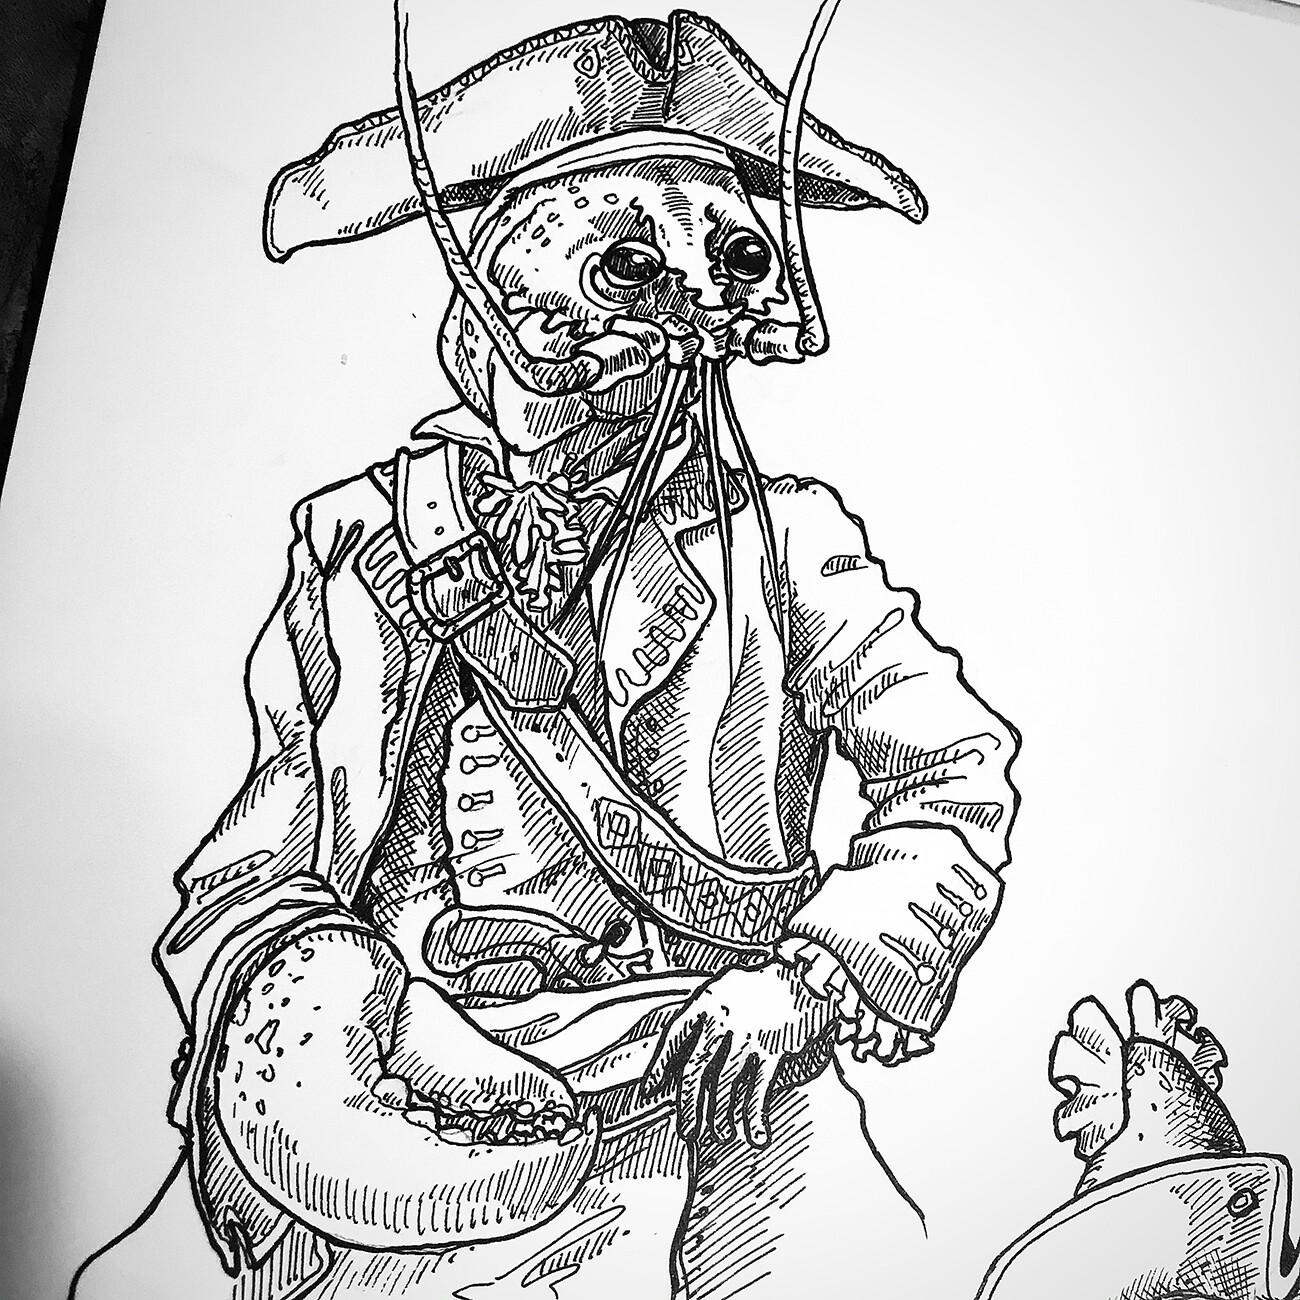 Lobster - Pirate study 02